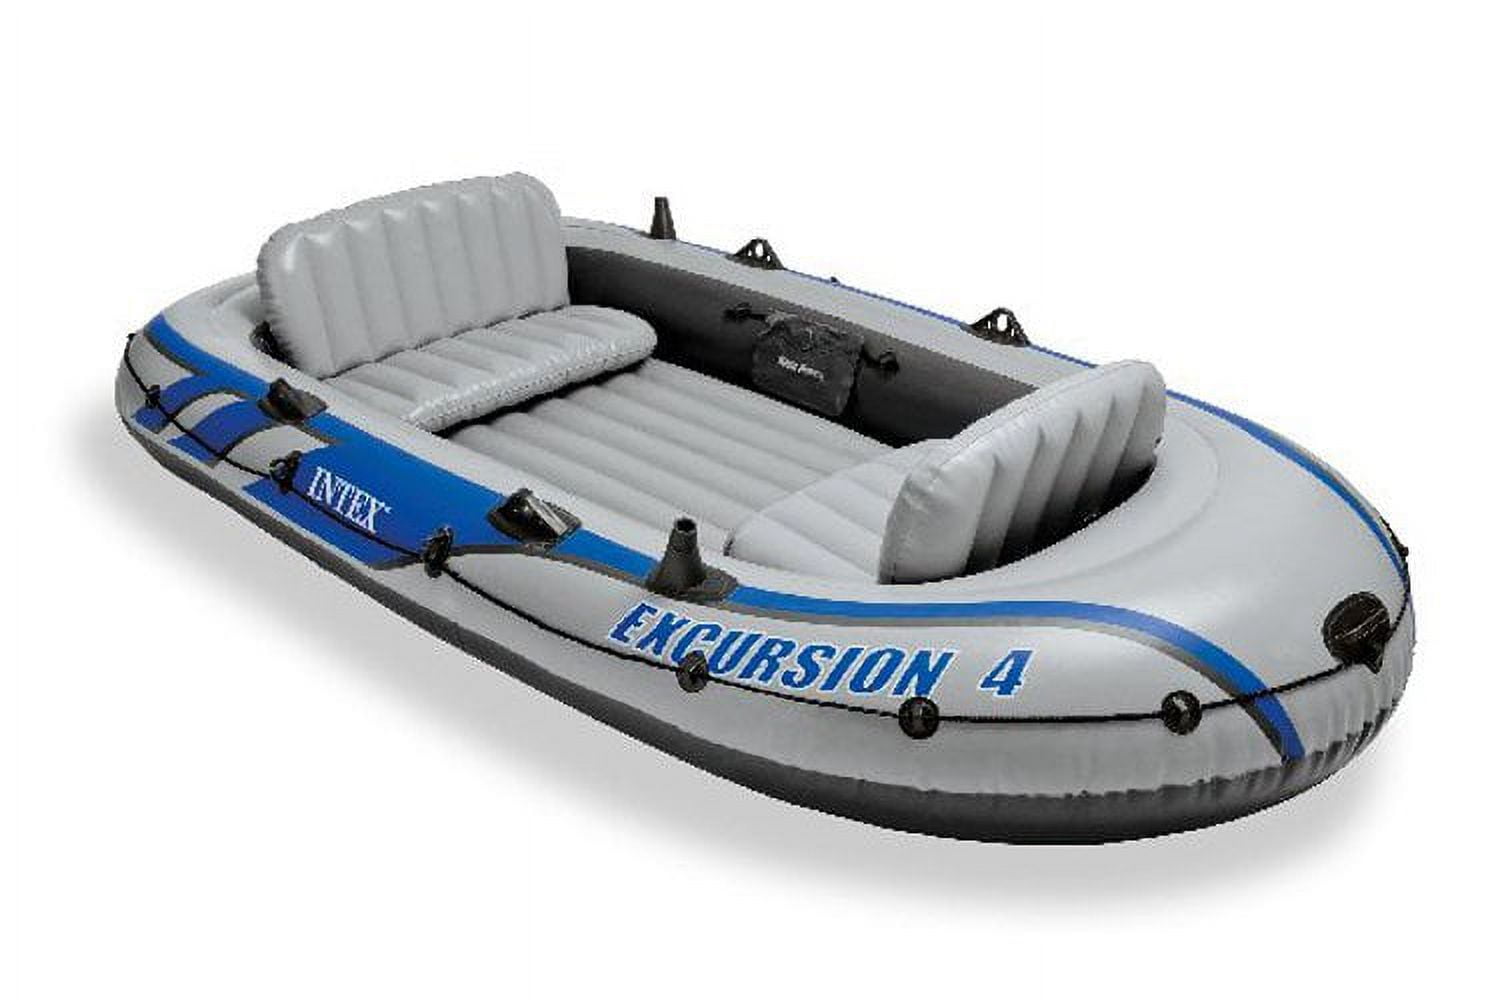  Inflatable Boat for Kids, 1/2-Person Green Foldable Inflatable  Kayak Canoe Fishing Boat Inflatable Travel Kayak with Double Valve for  Adults Fishing : Sports & Outdoors